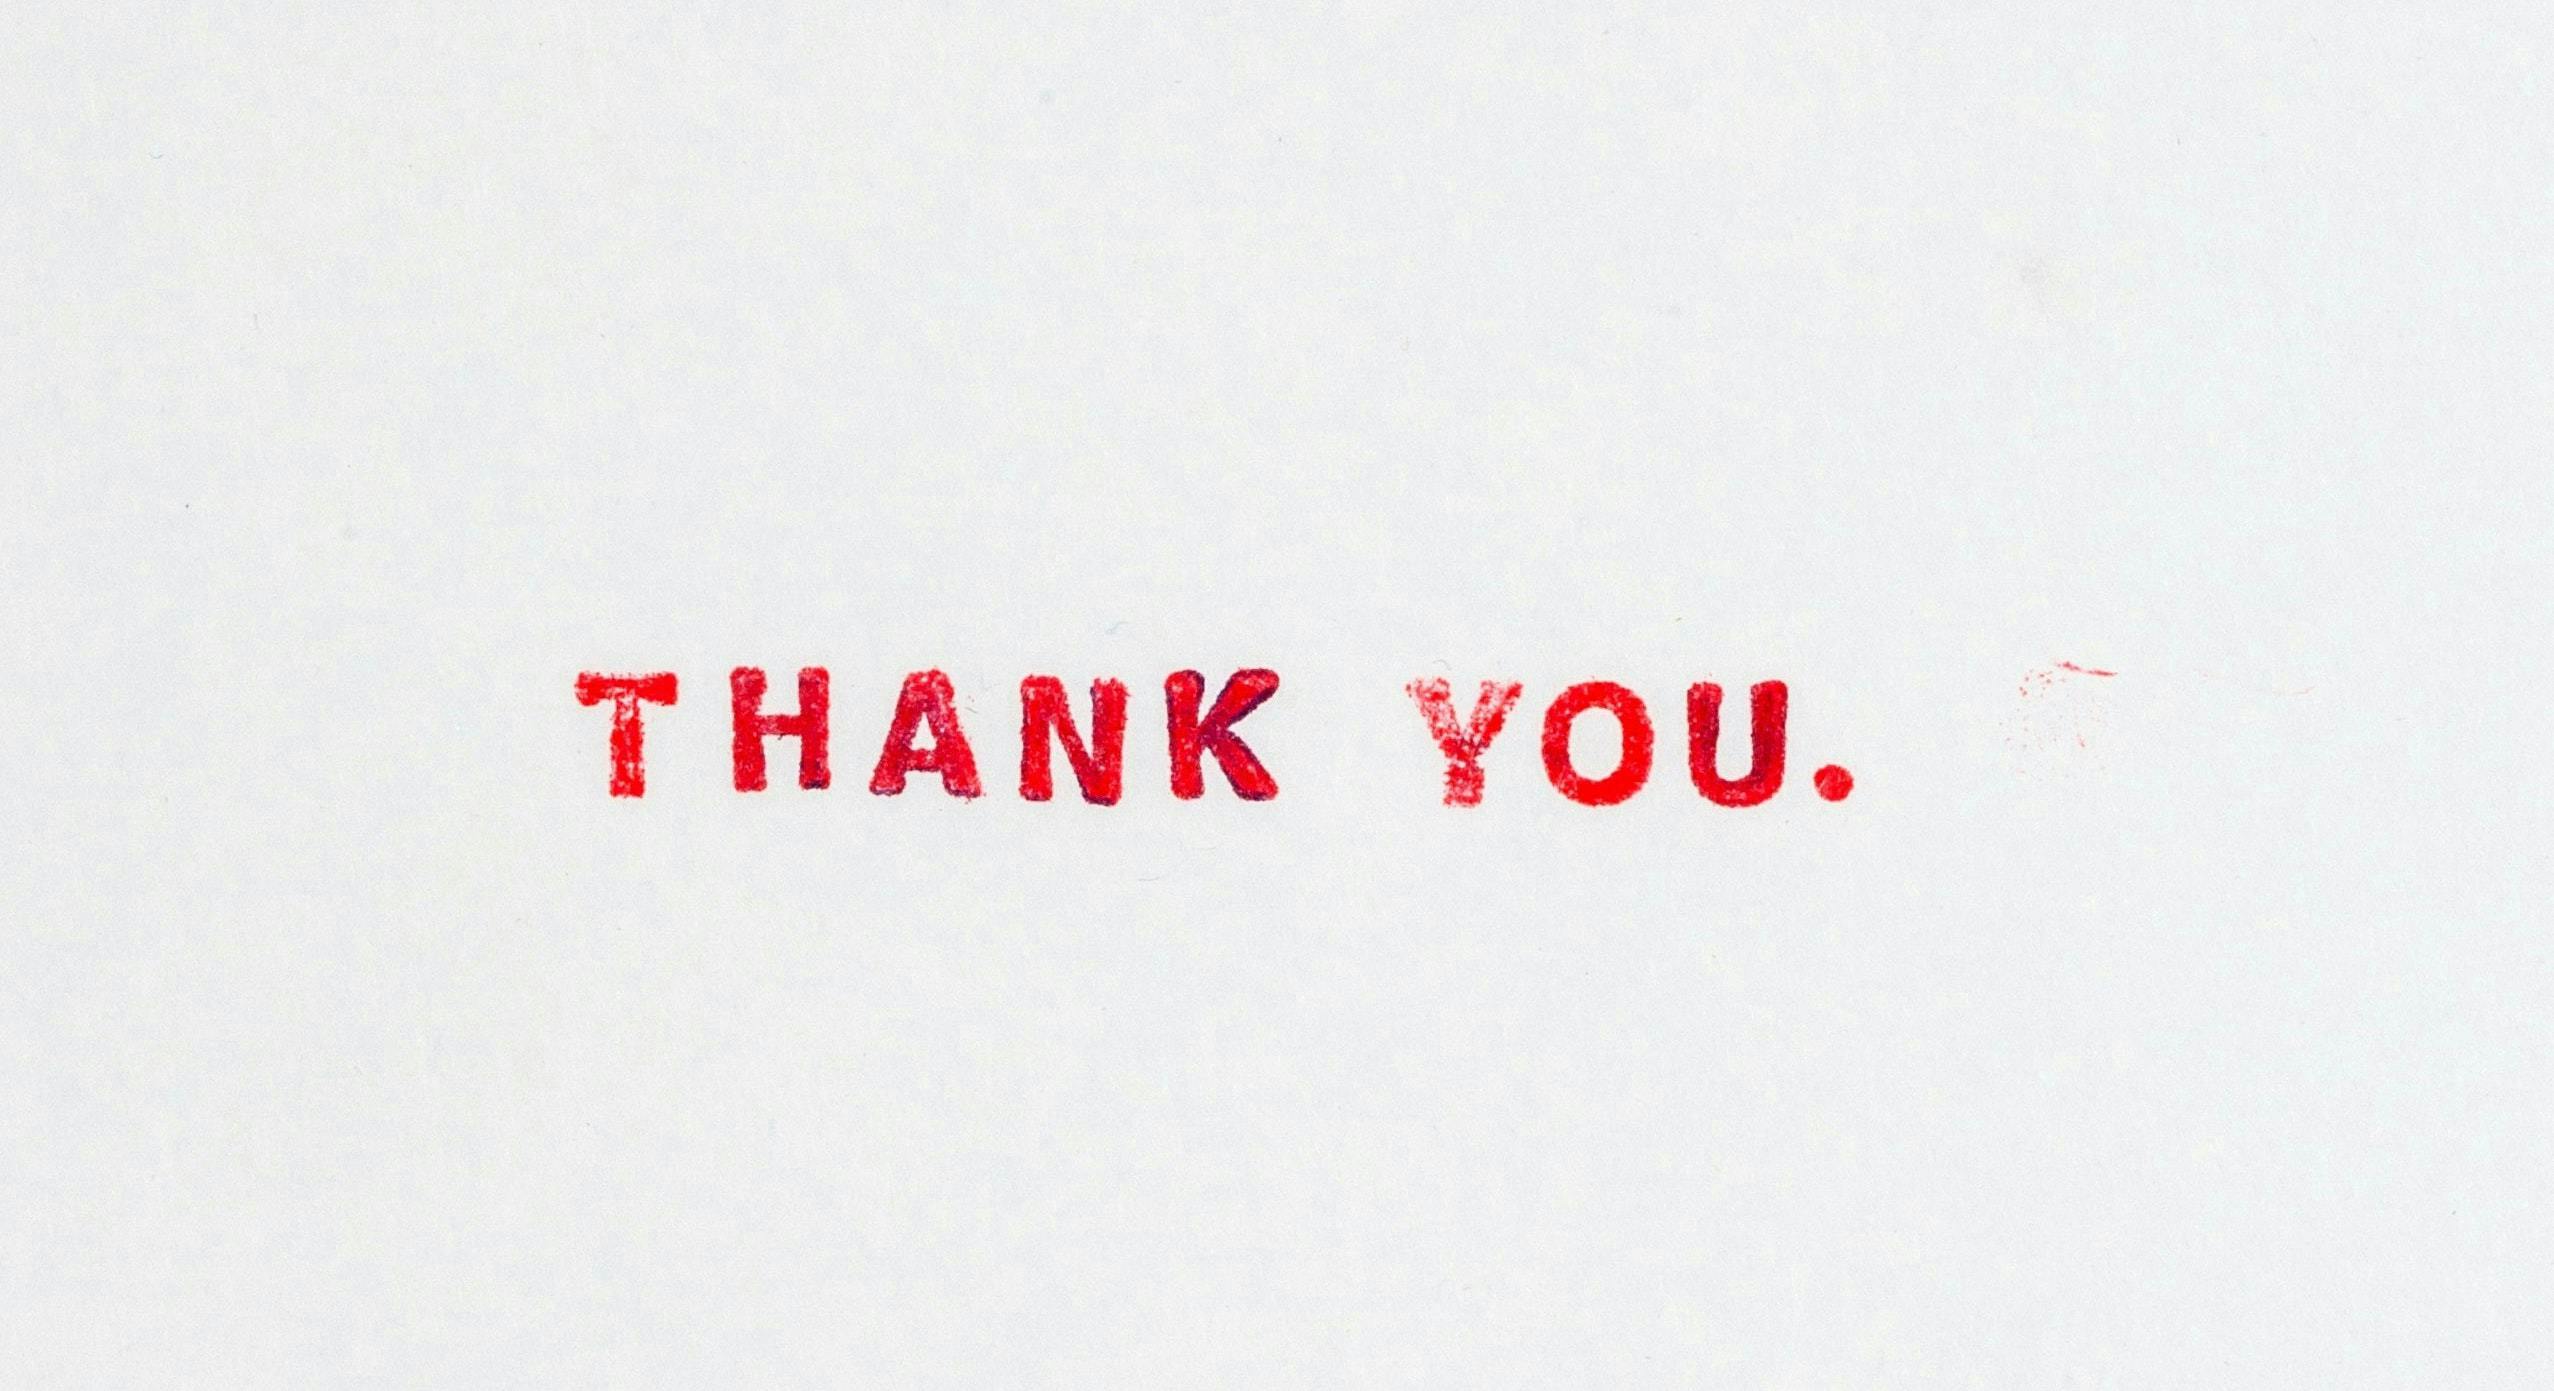 Text "THANK YOU." printed in red ink on a plain white background.